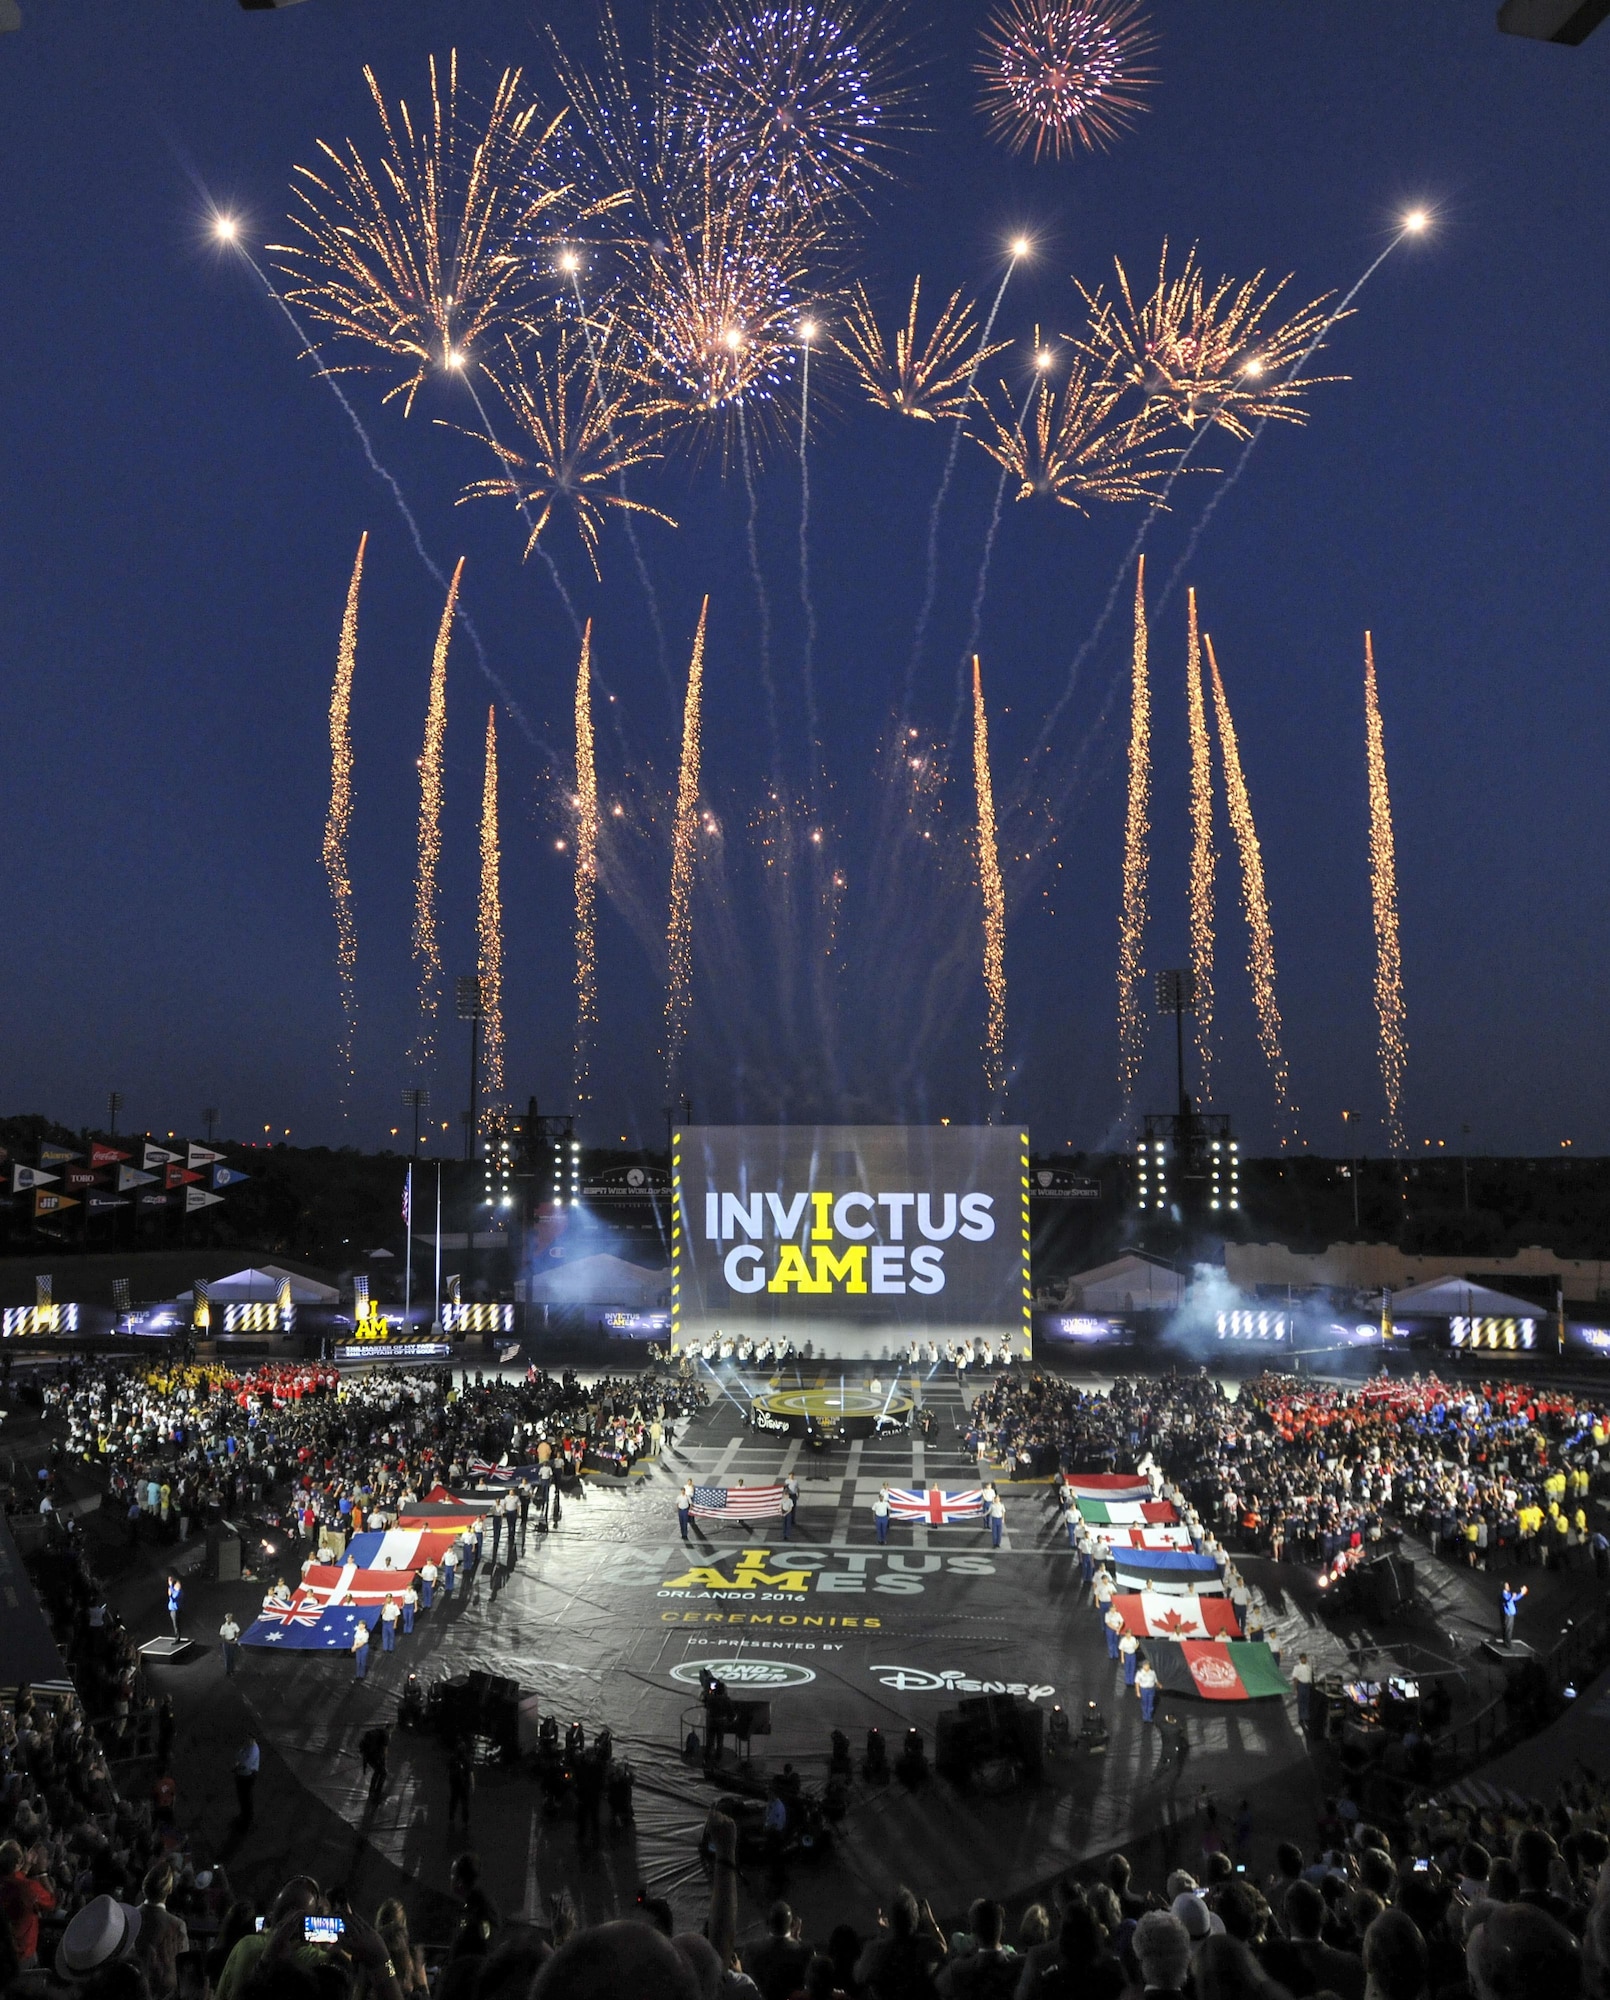 Fireworks erupt as the flags of 15 nations are displayed during the opening ceremony for Invictus Games 2016 at the ESPN Wide World of Sports Complex in Orlando, Fla., May 8, 2016. The 2016 Invictus Games officially kicked off with the ceremony and wounded warriors will compete over the next five days in multiple adaptive sports events. (U.S. Air Force photo/Senior Master Sgt. Kevin Wallace) 